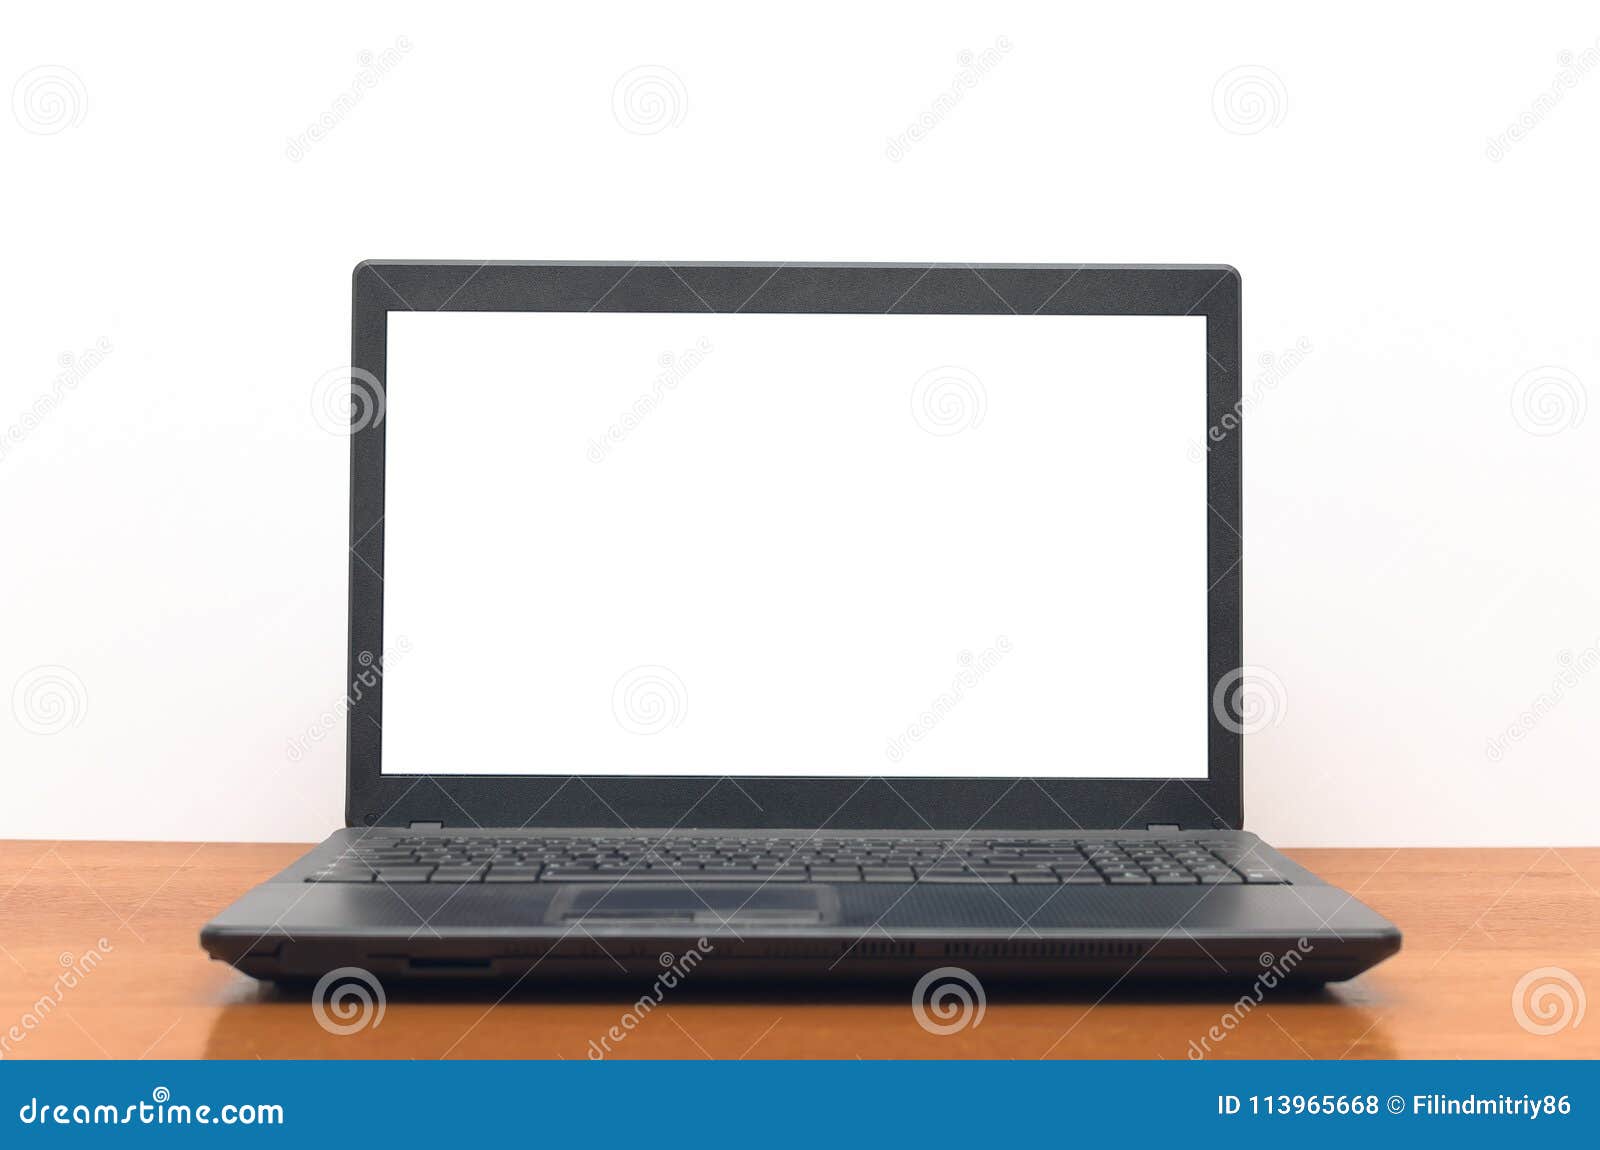 Laptop Computer With Blank White Screen On The Desk Table Stock